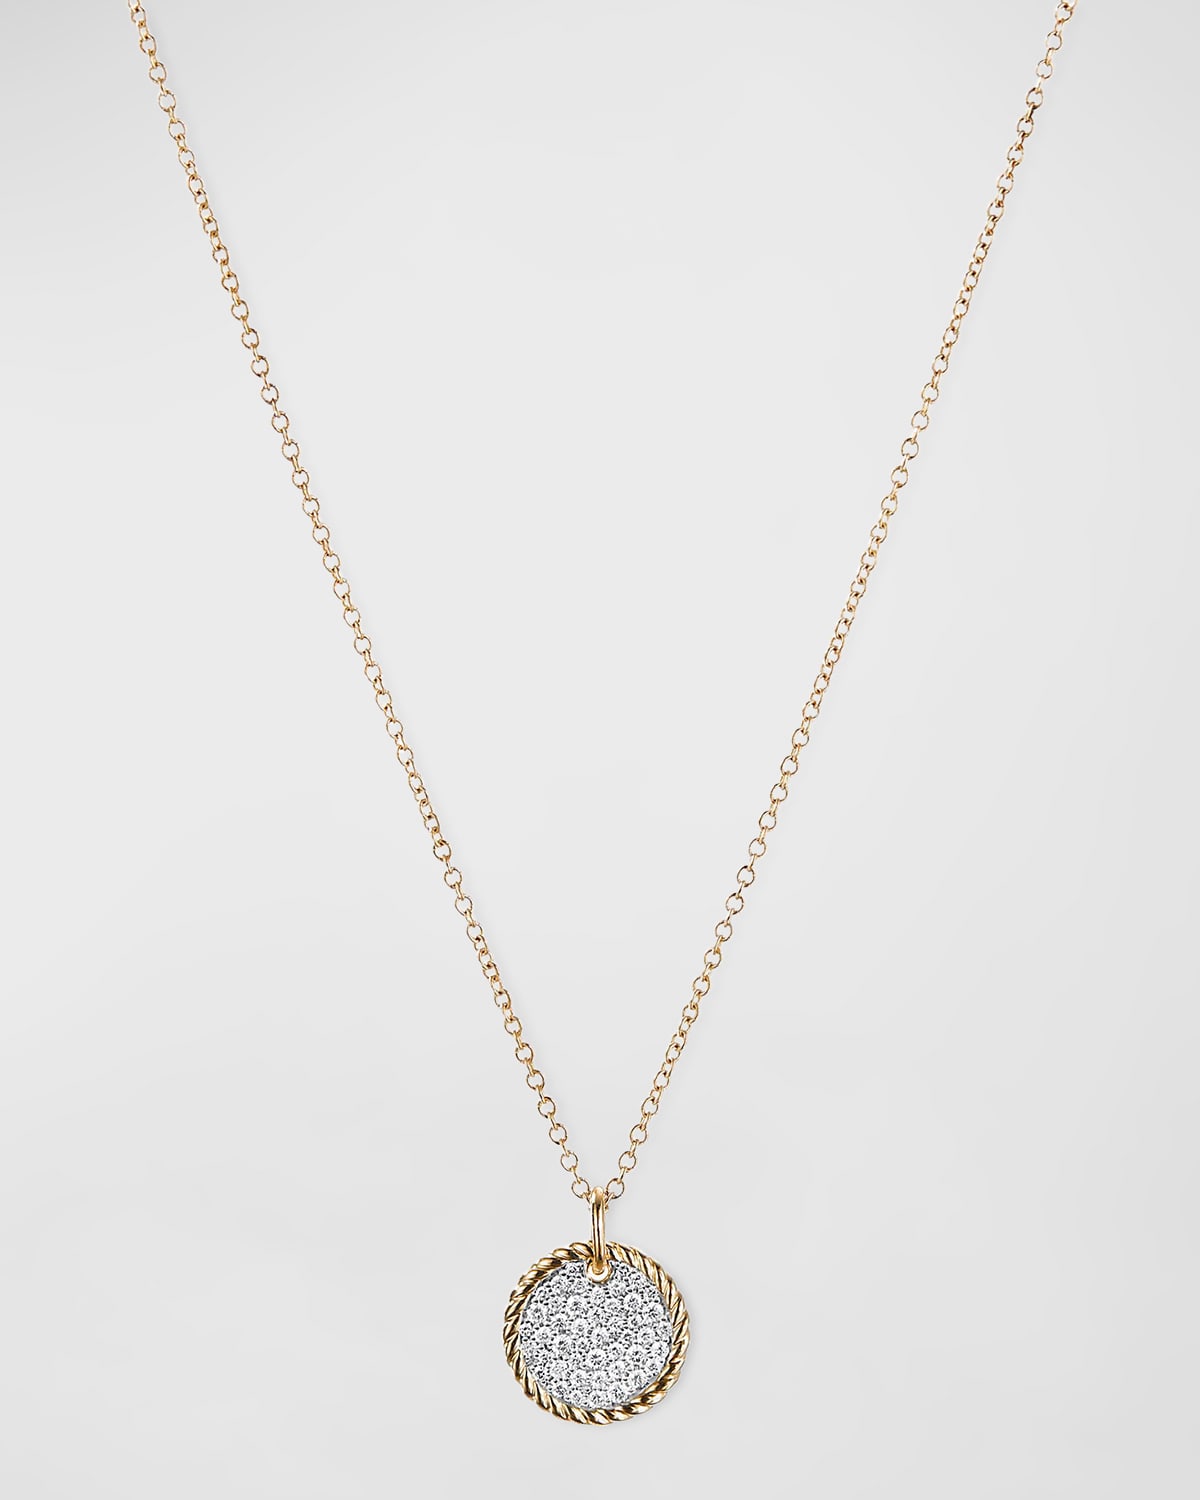 Pave Plate Pendant Necklace with Diamonds and 18k Gold